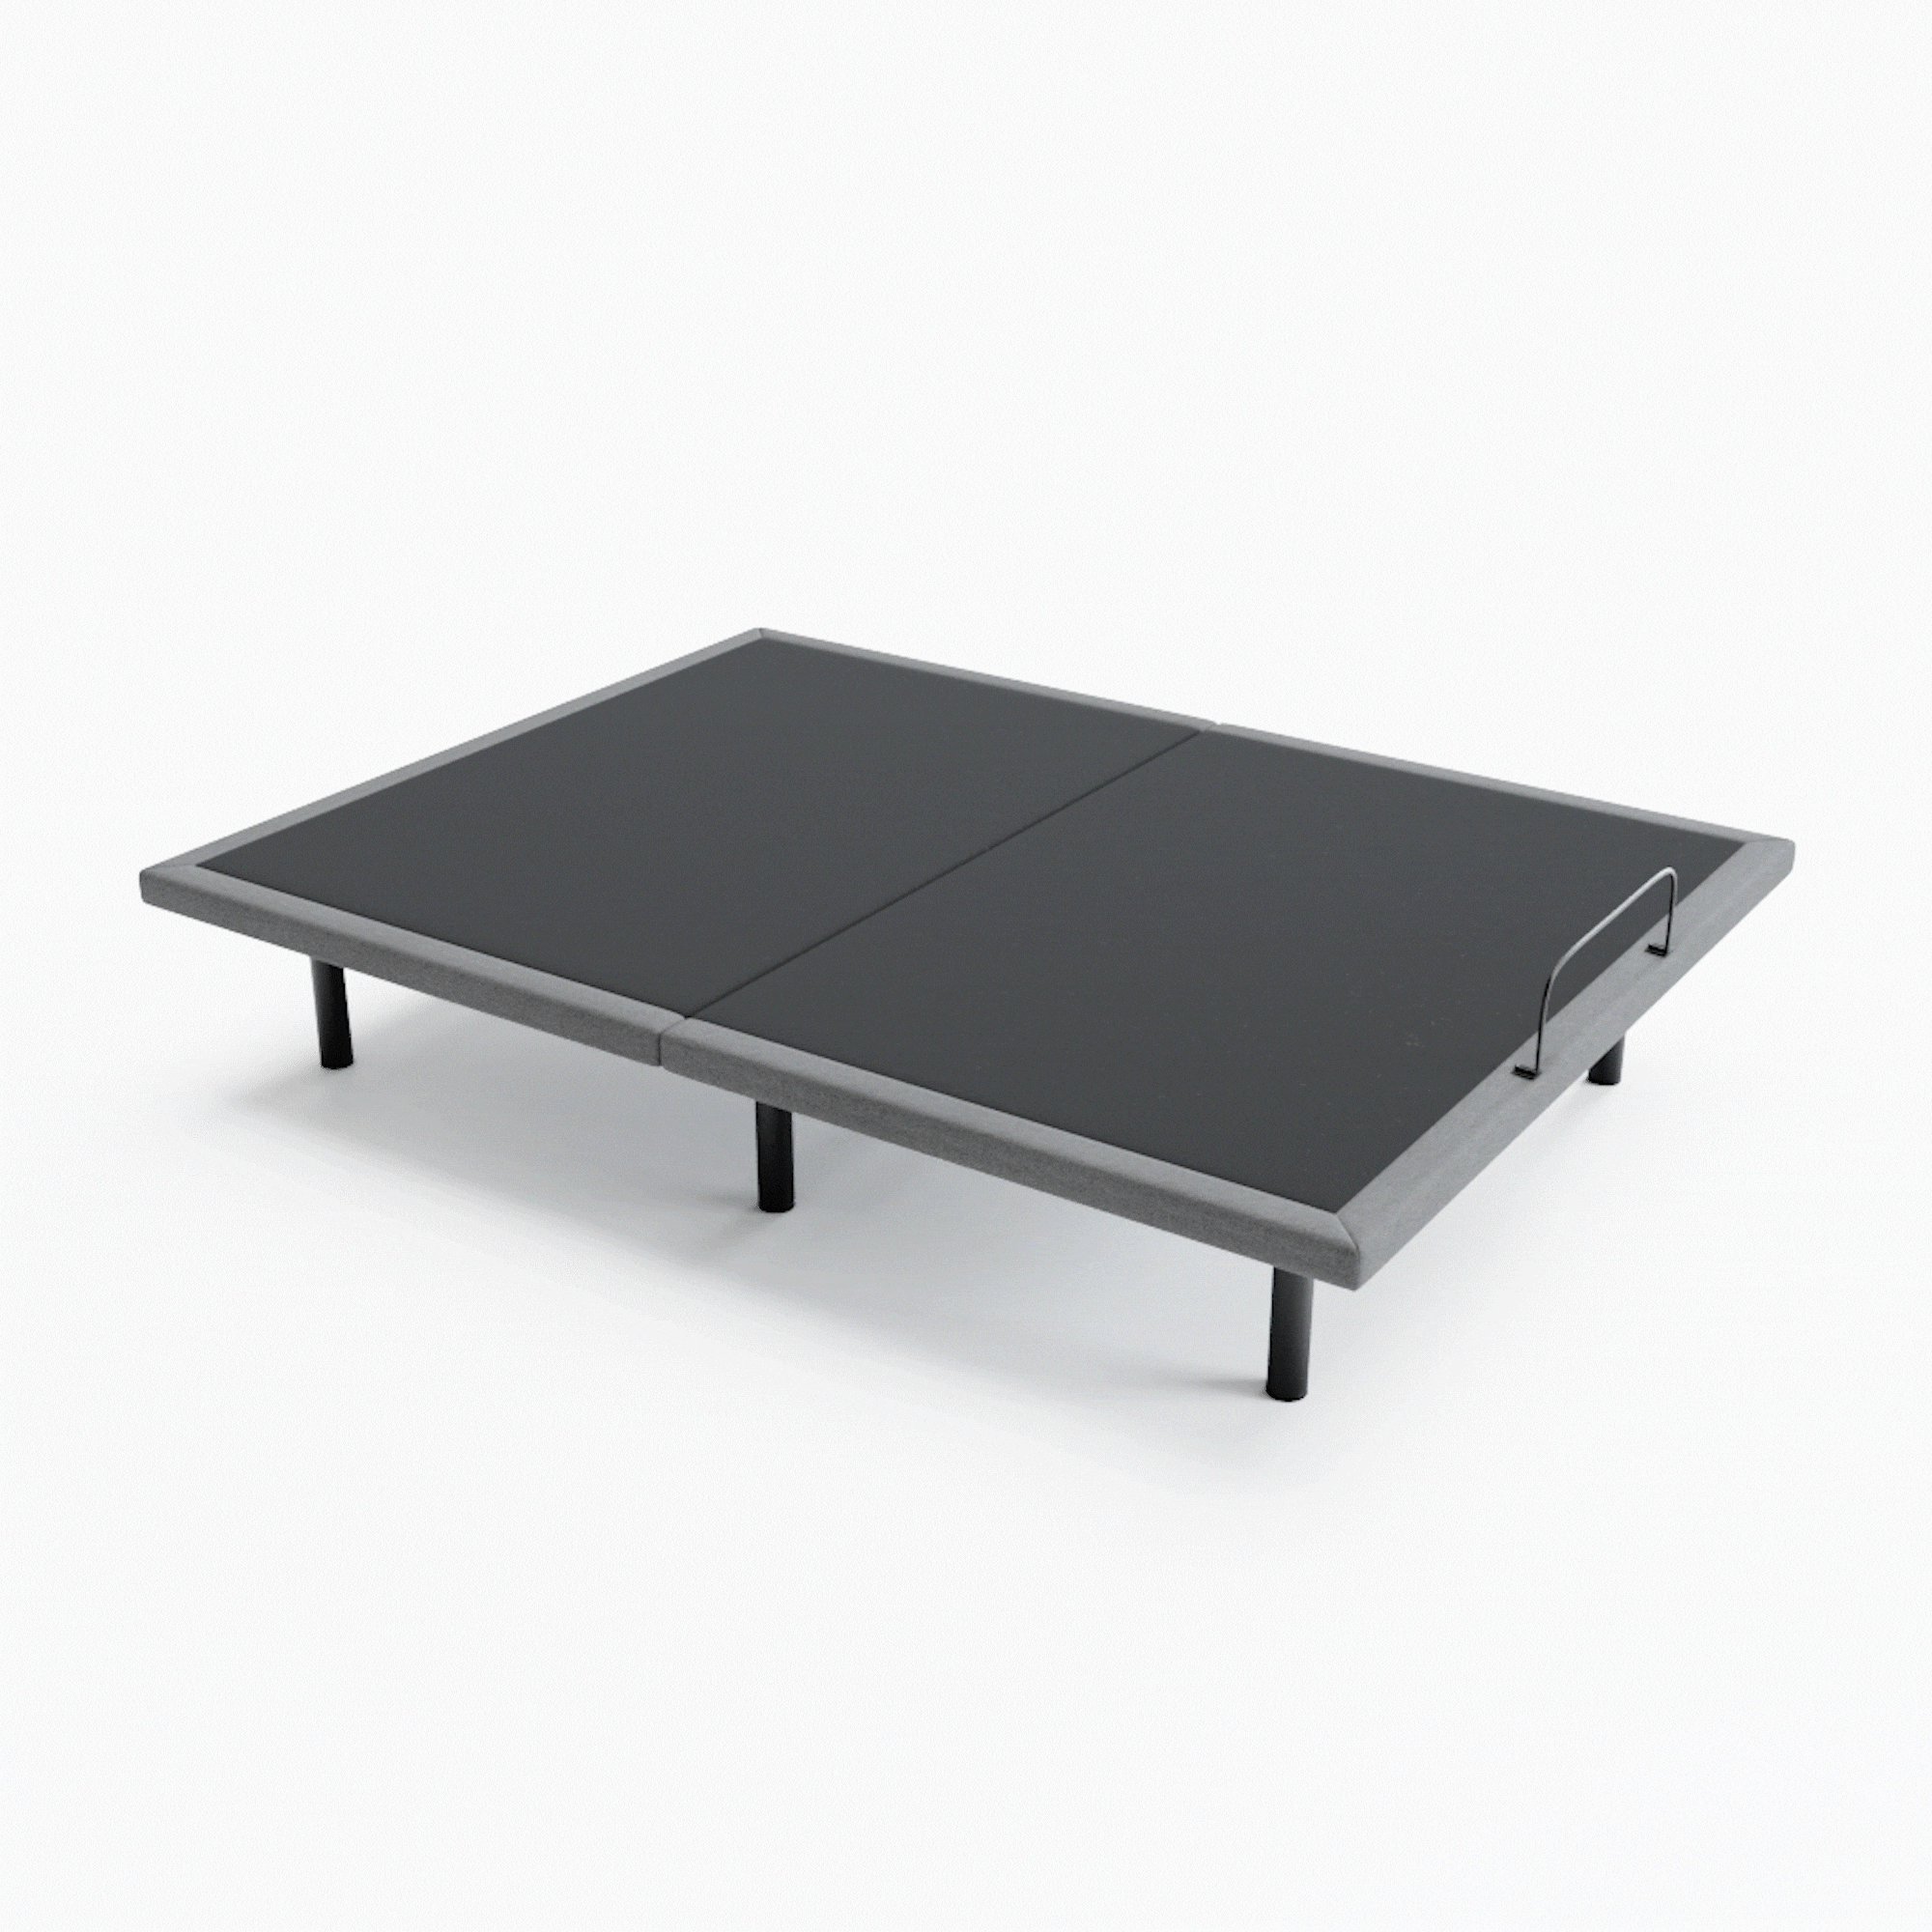 Lucid Advanced Power Adjustable Bed, How To Raise An Adjustable Bed